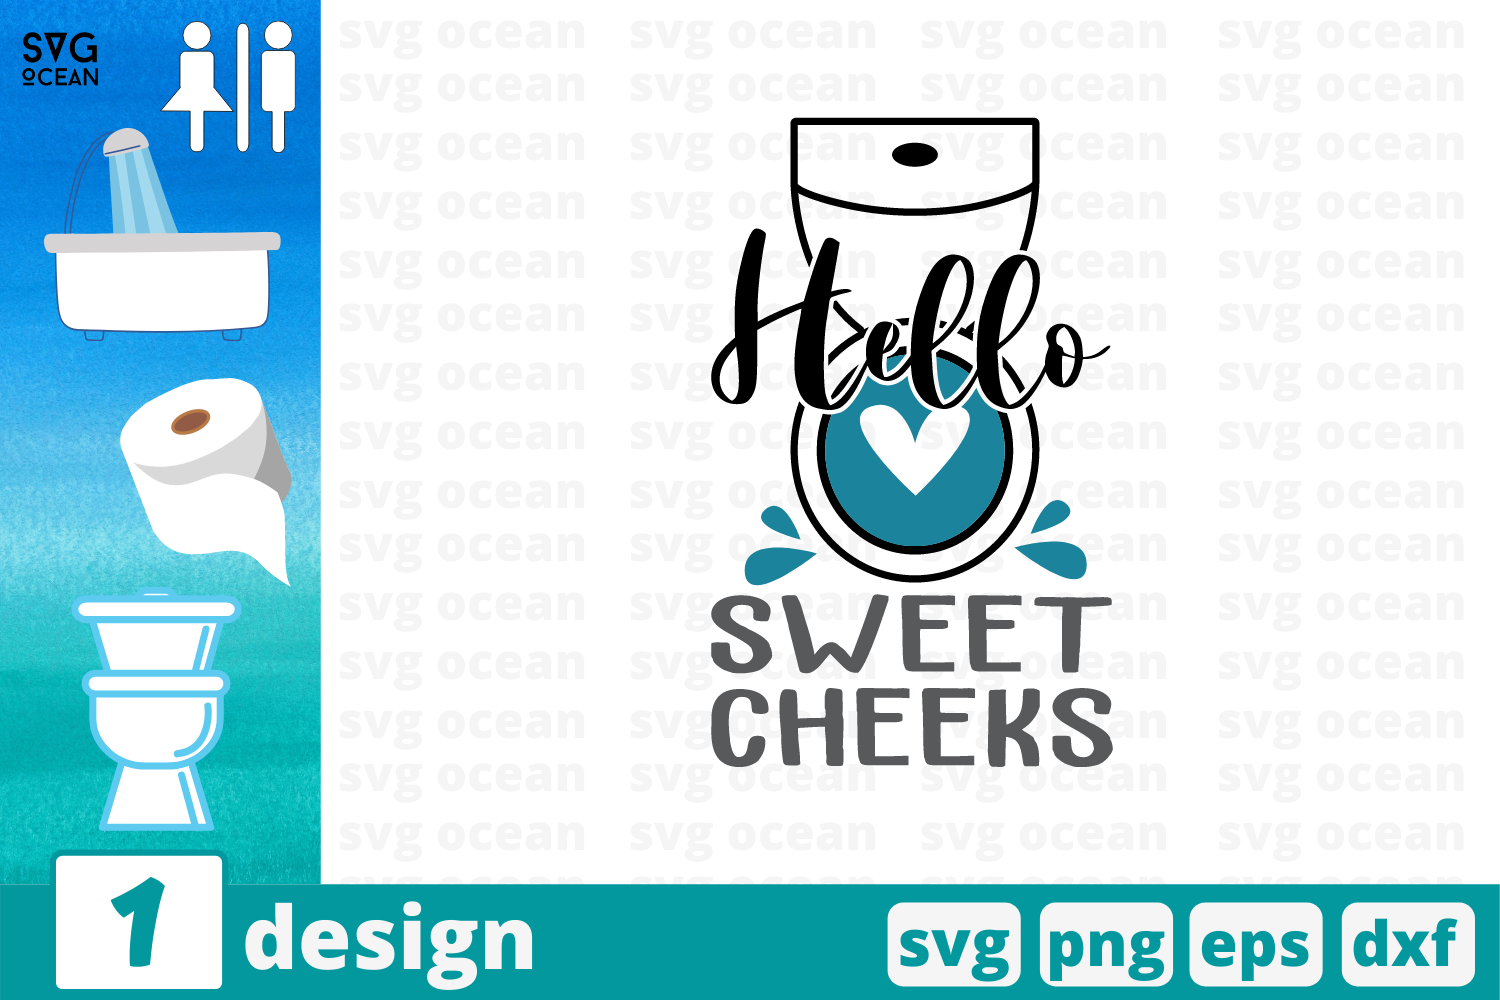 Download Hello Sweet Cheeks Svg Cut File By Svgocean Thehungryjpeg Com